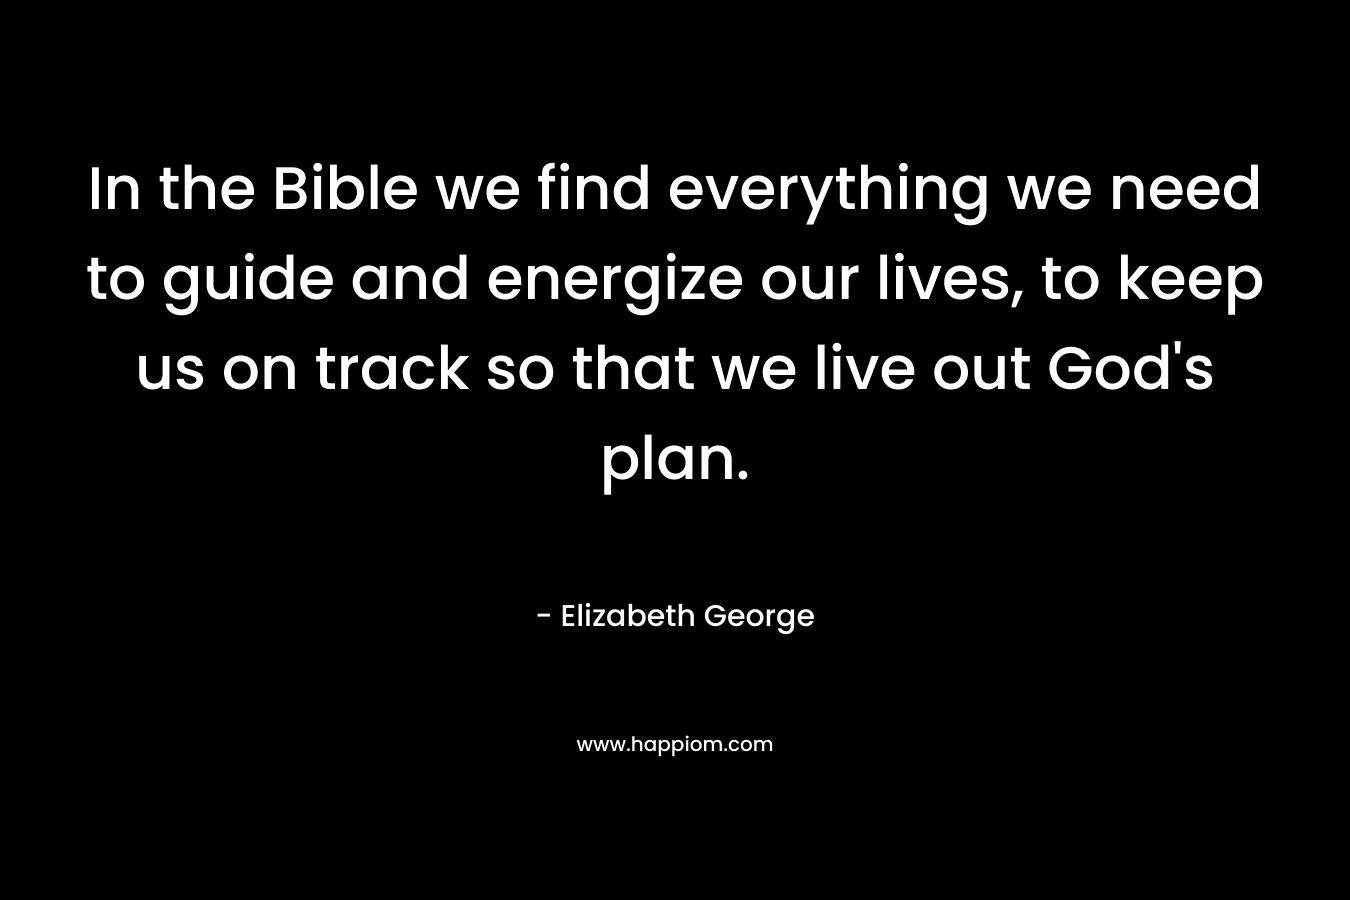 In the Bible we find everything we need to guide and energize our lives, to keep us on track so that we live out God's plan.